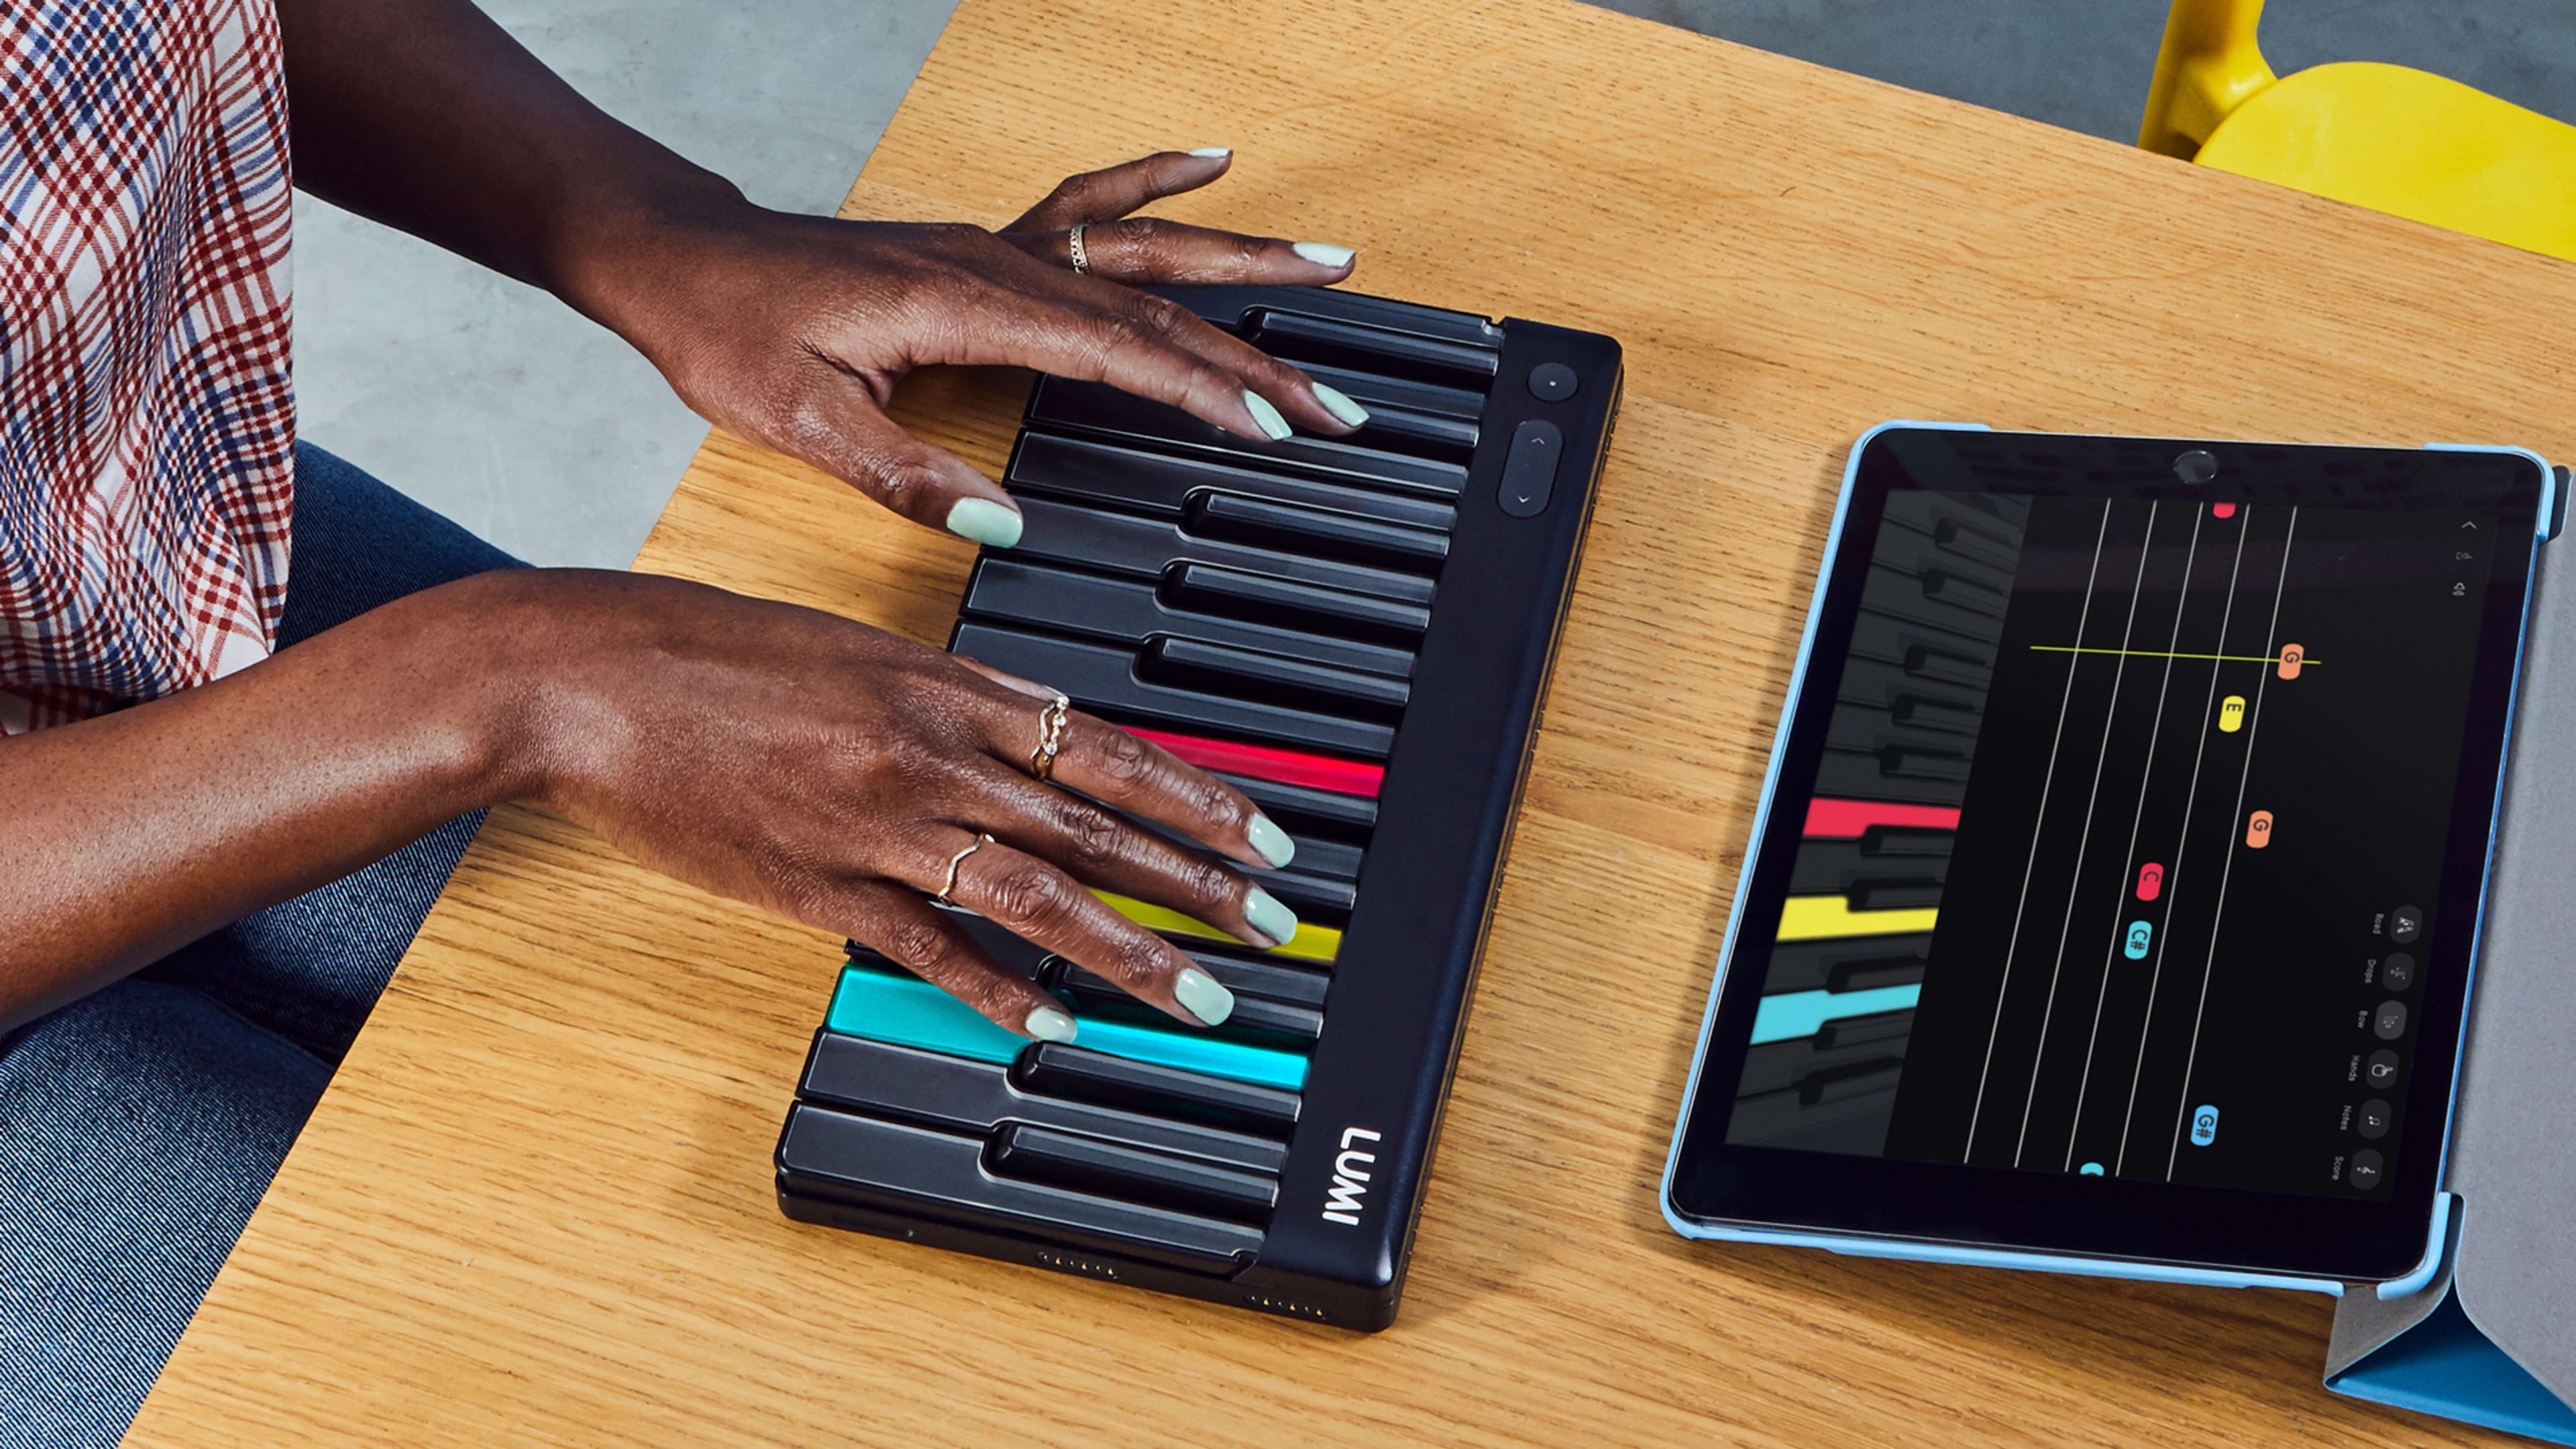 Want to learn to play piano? This innovative keyboard will teach you